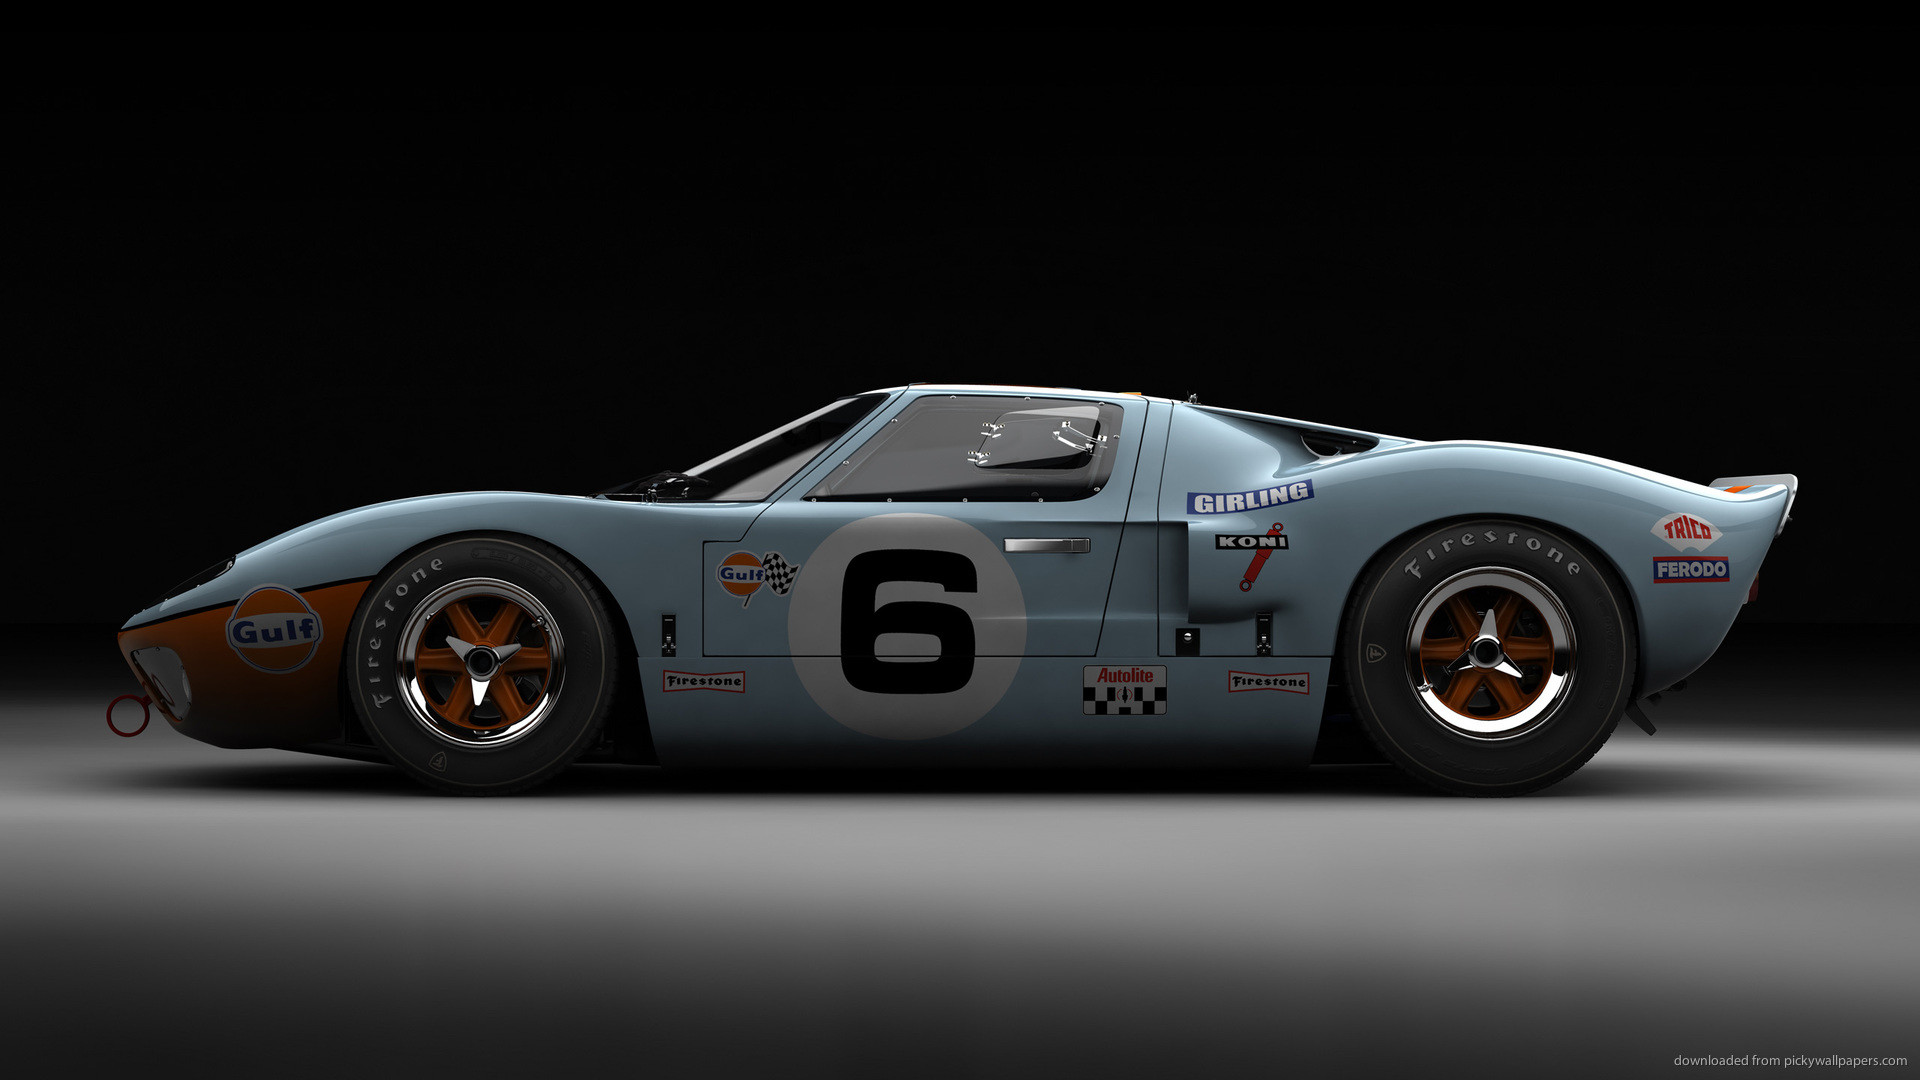 2018 Ford Gt40 Wallpaper (66+ images)